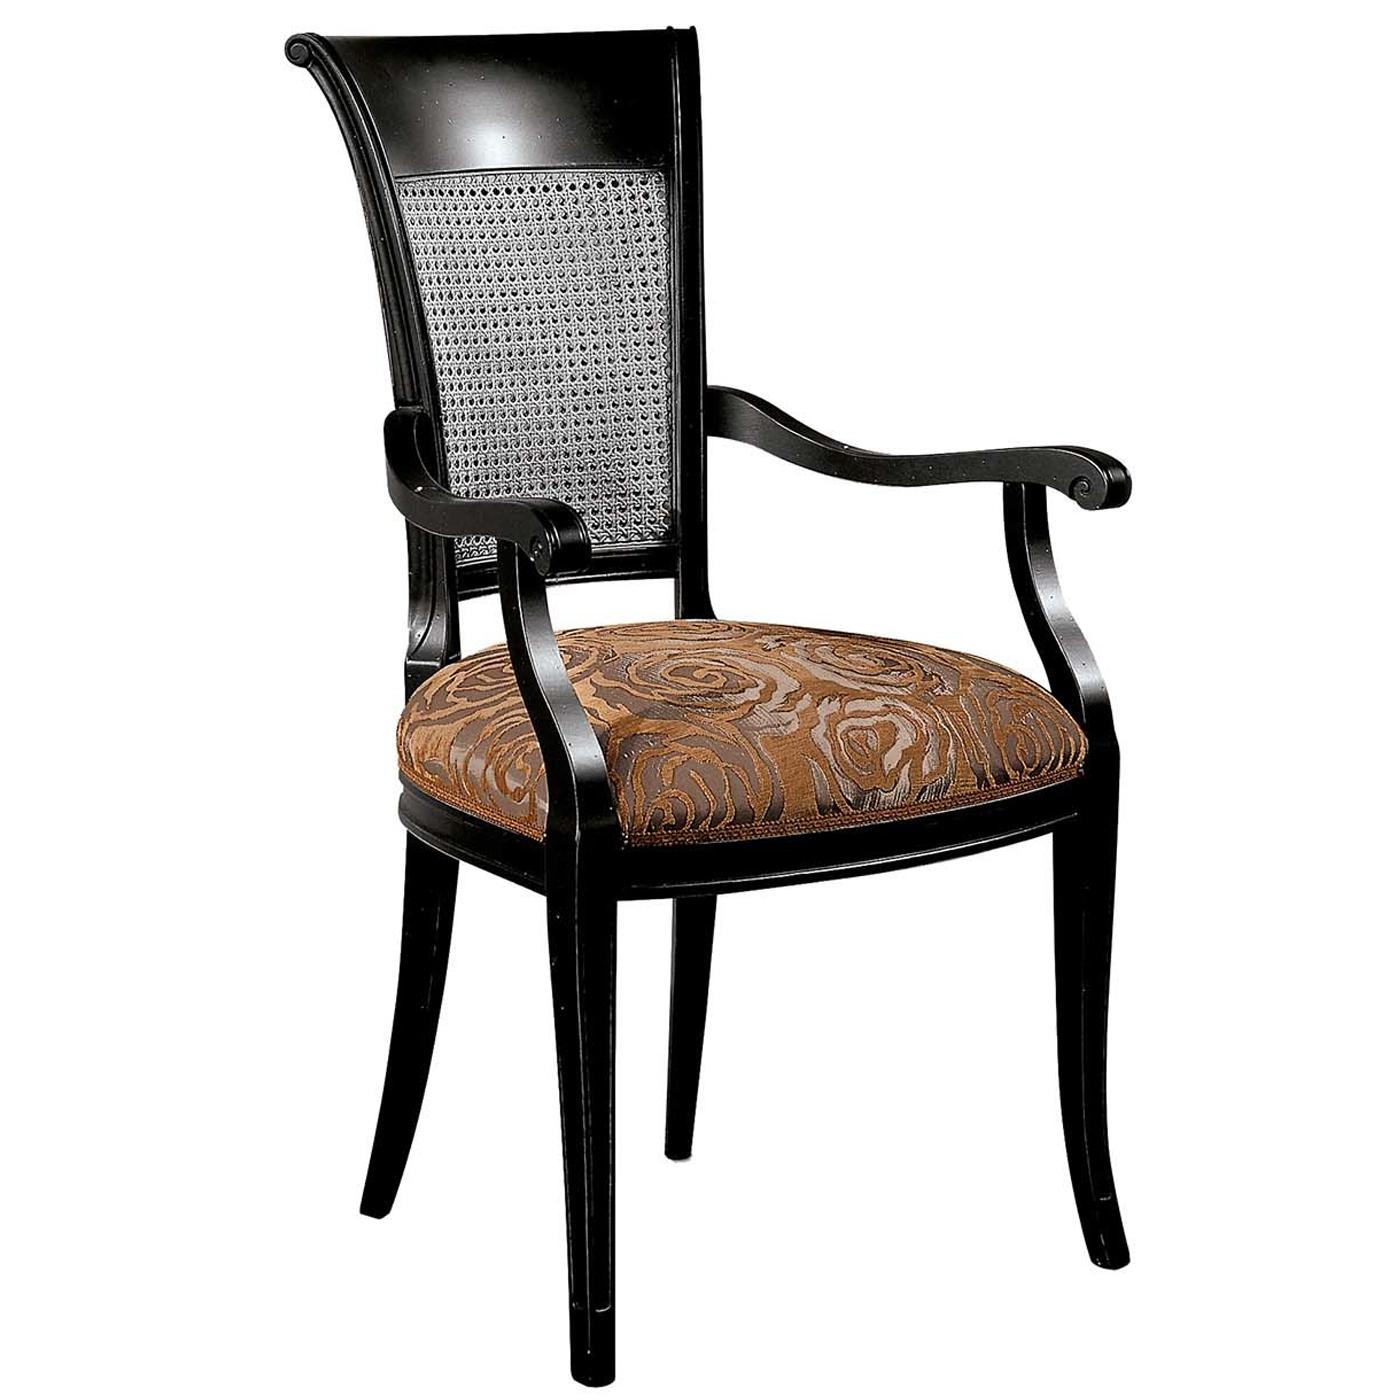 Capotavola Viennese Cane Chair with Armrests